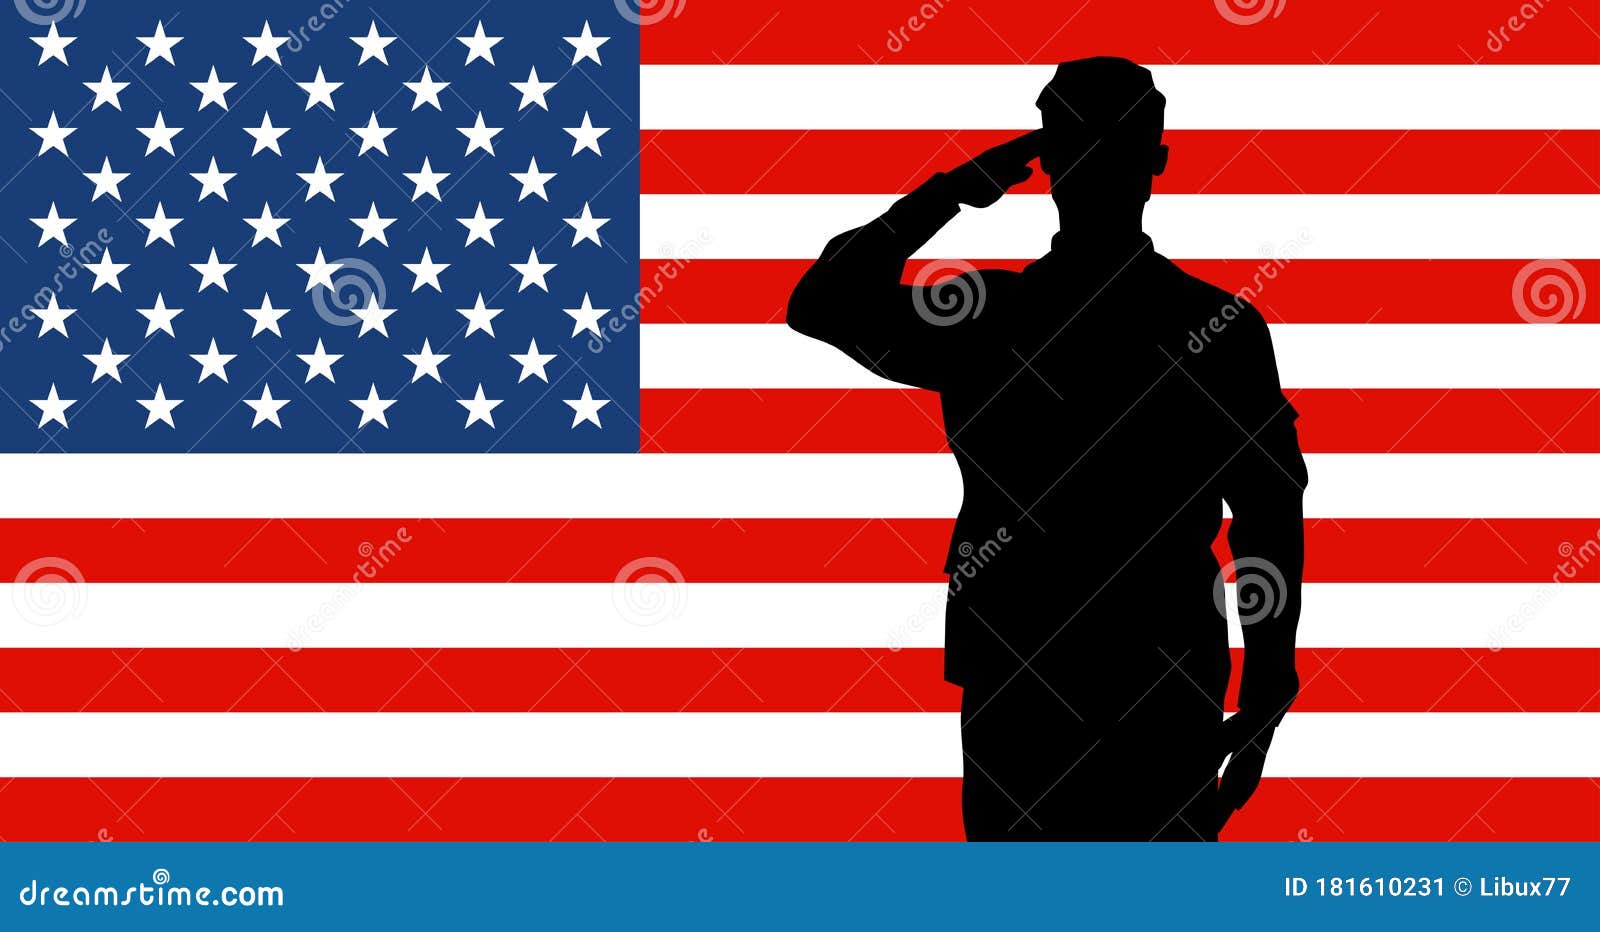 soldiers silhouette saluting the usa flag for memorial day or veterans day 